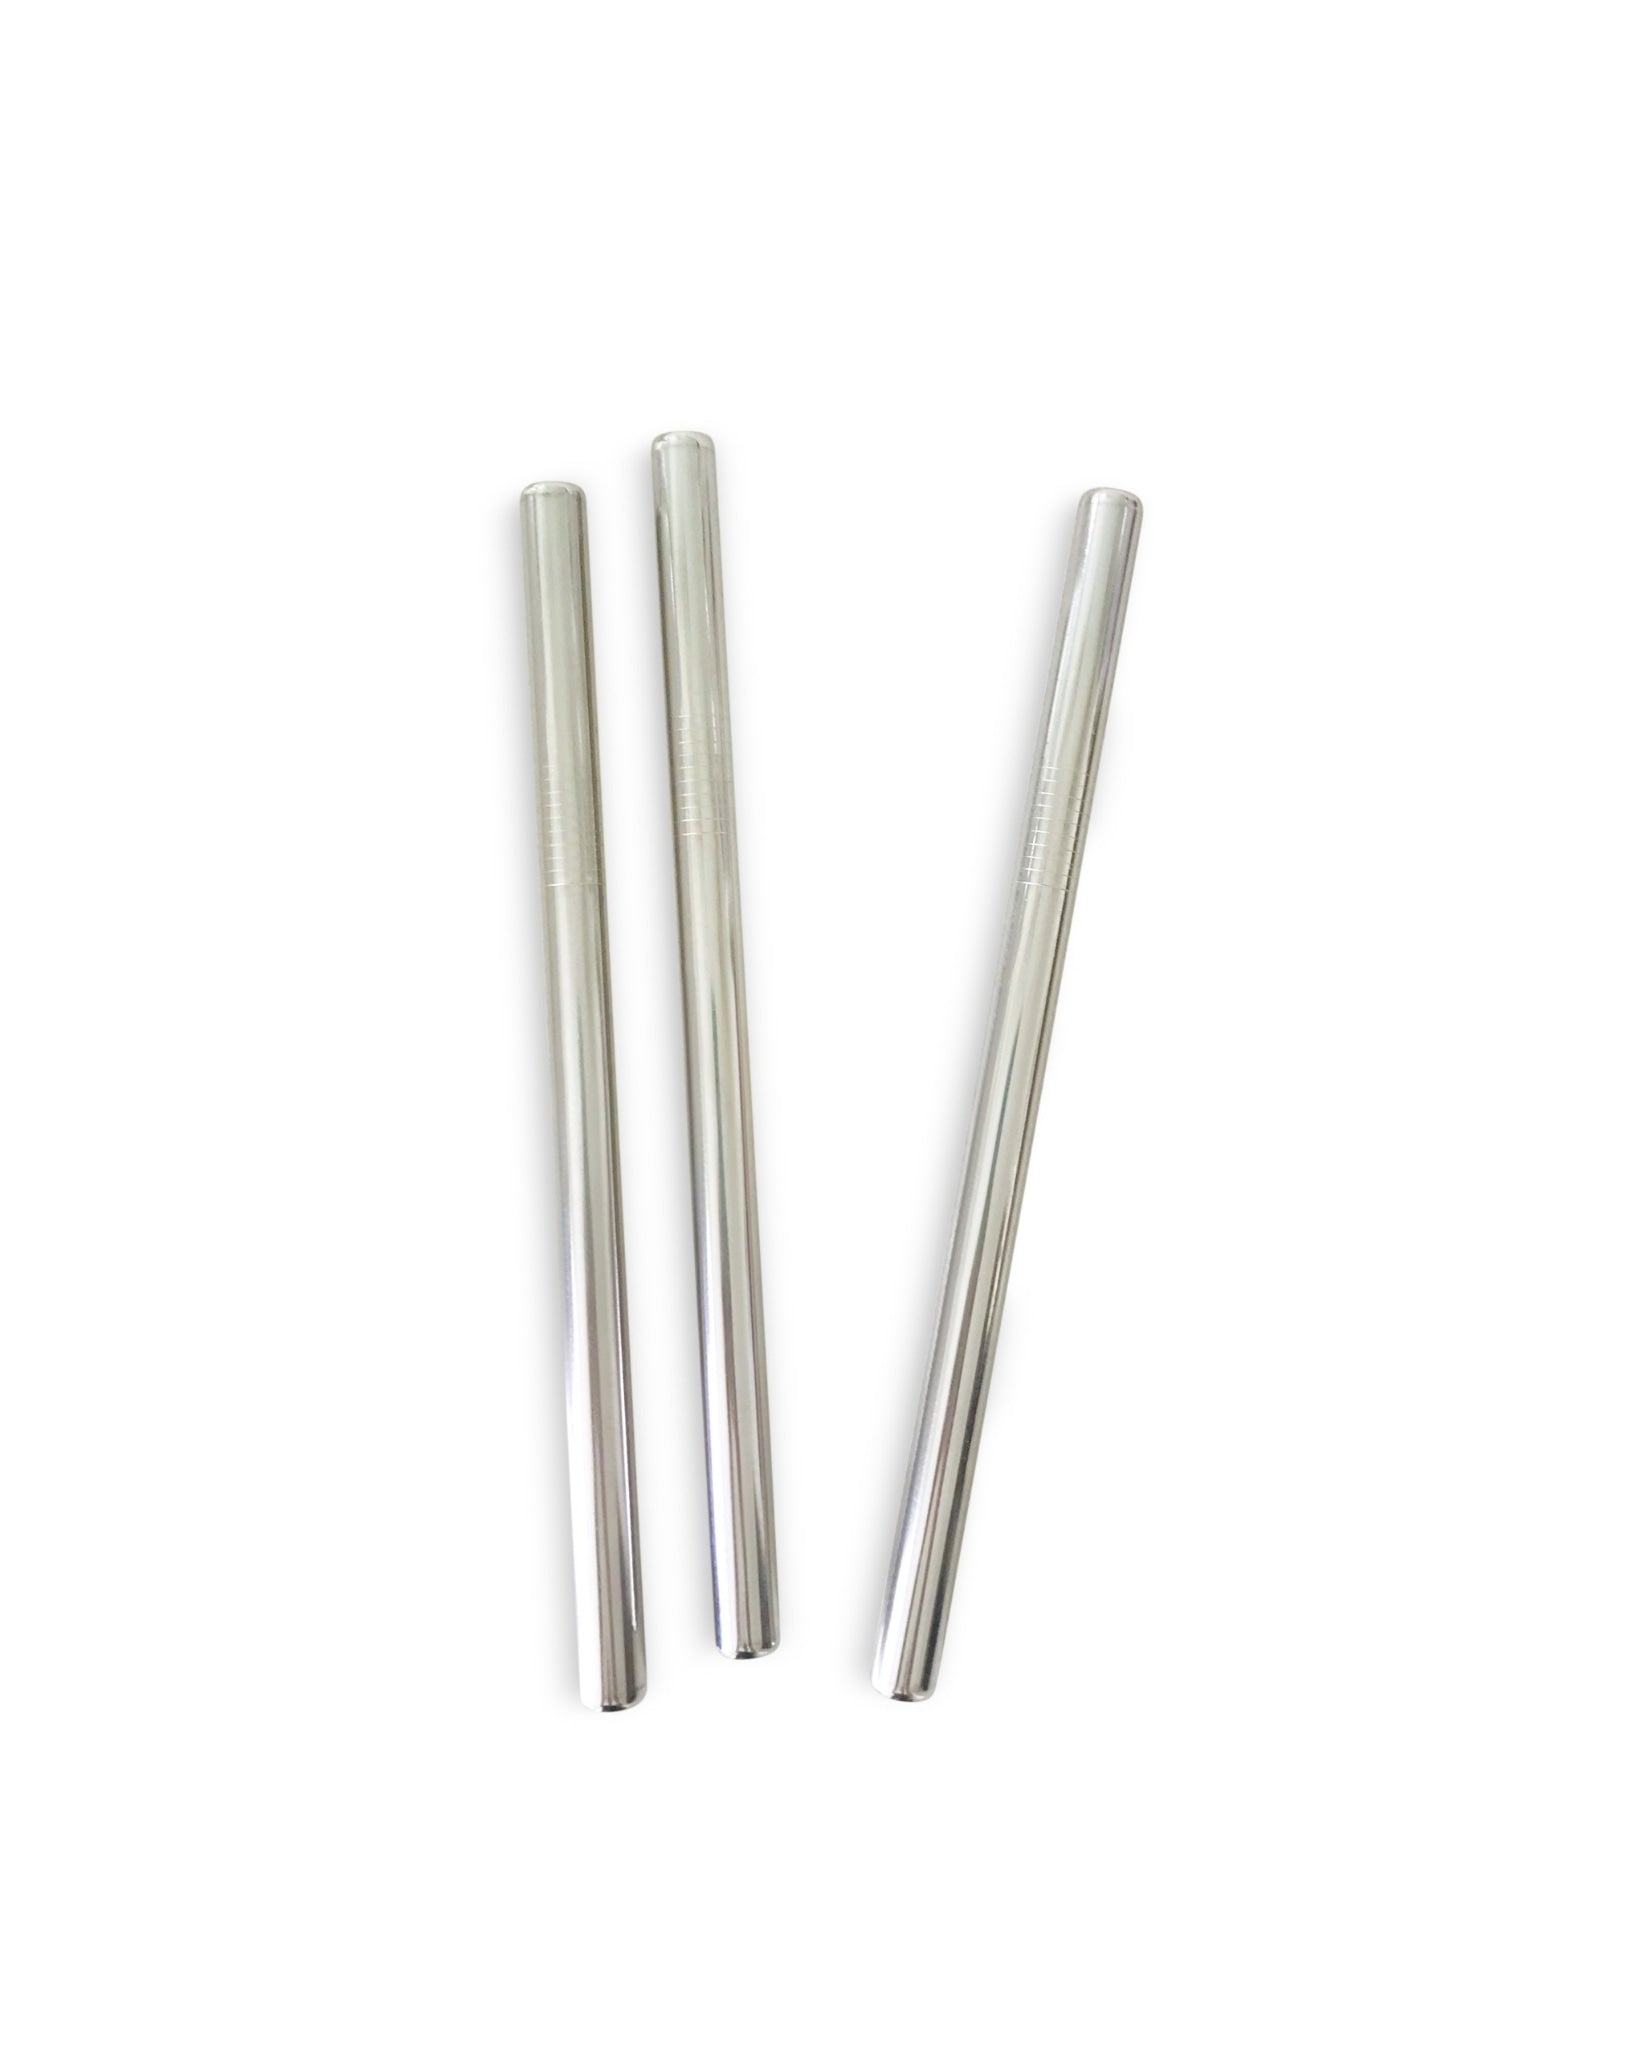 Stainless Steel Smoothie/Bubble Tea Straw 8.5"